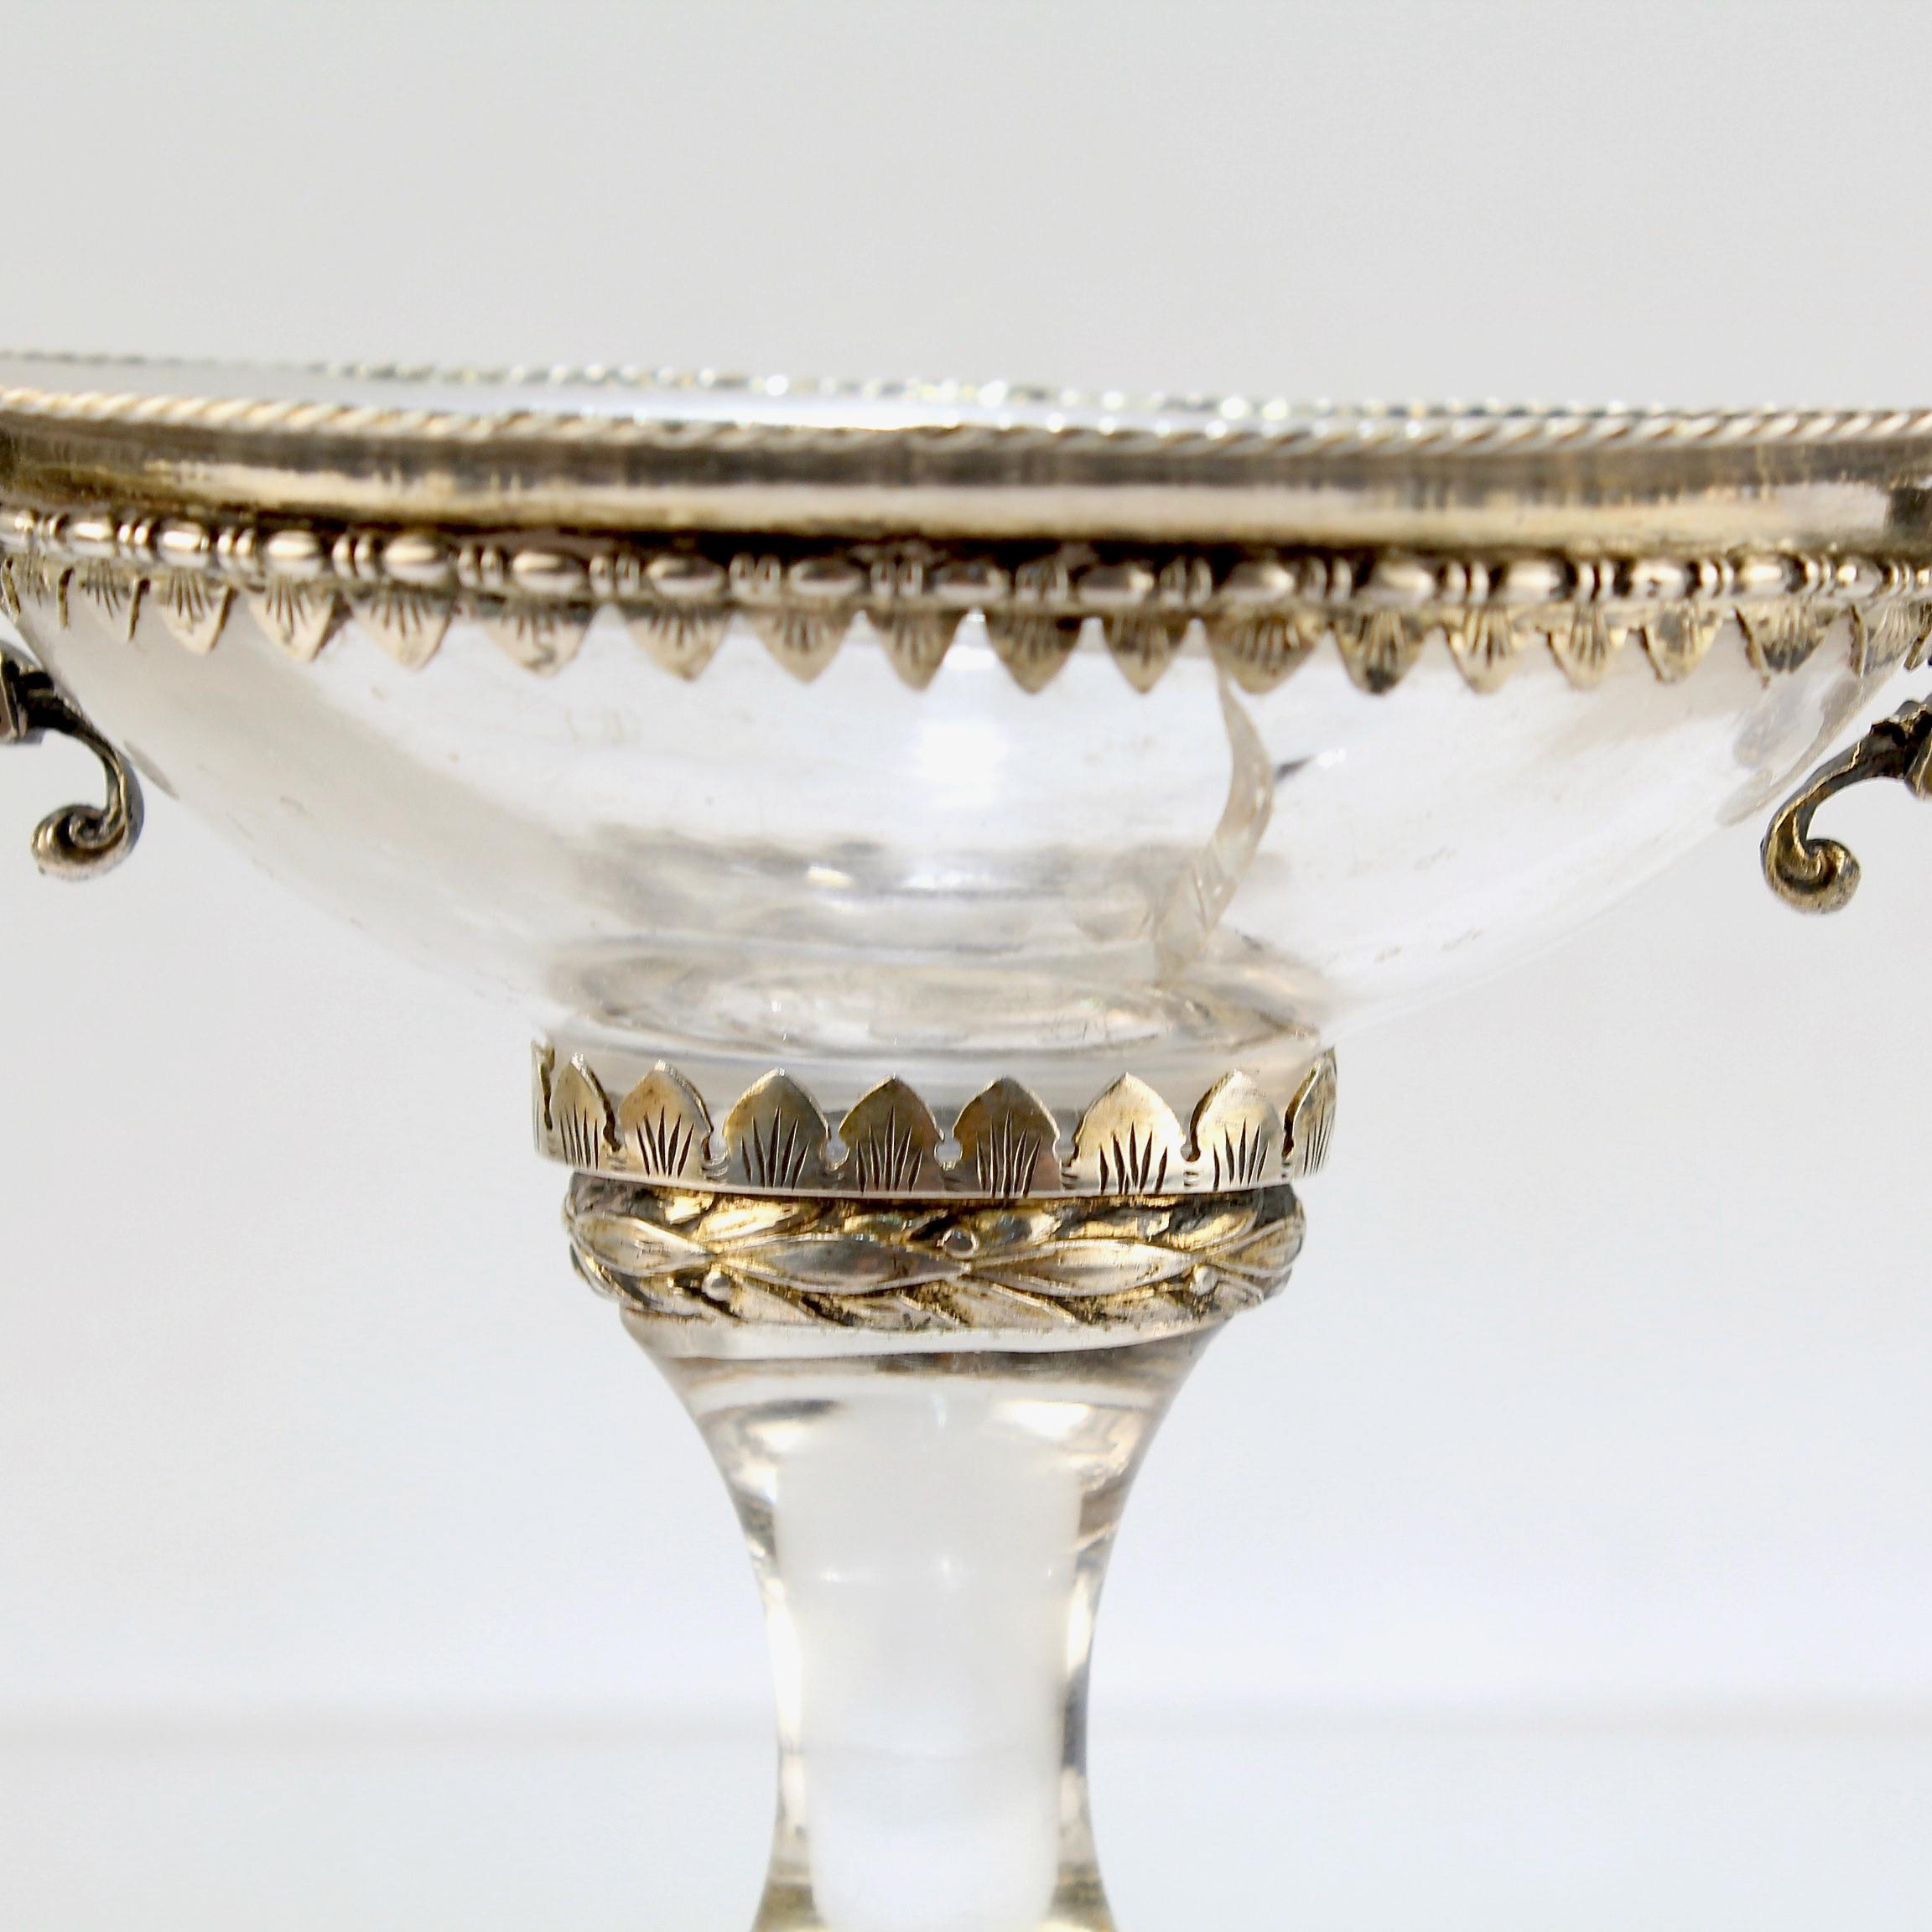 Antique 18th or 19th Century Austrian Silver Mounted Rock Crystal Salt Cellar For Sale 2